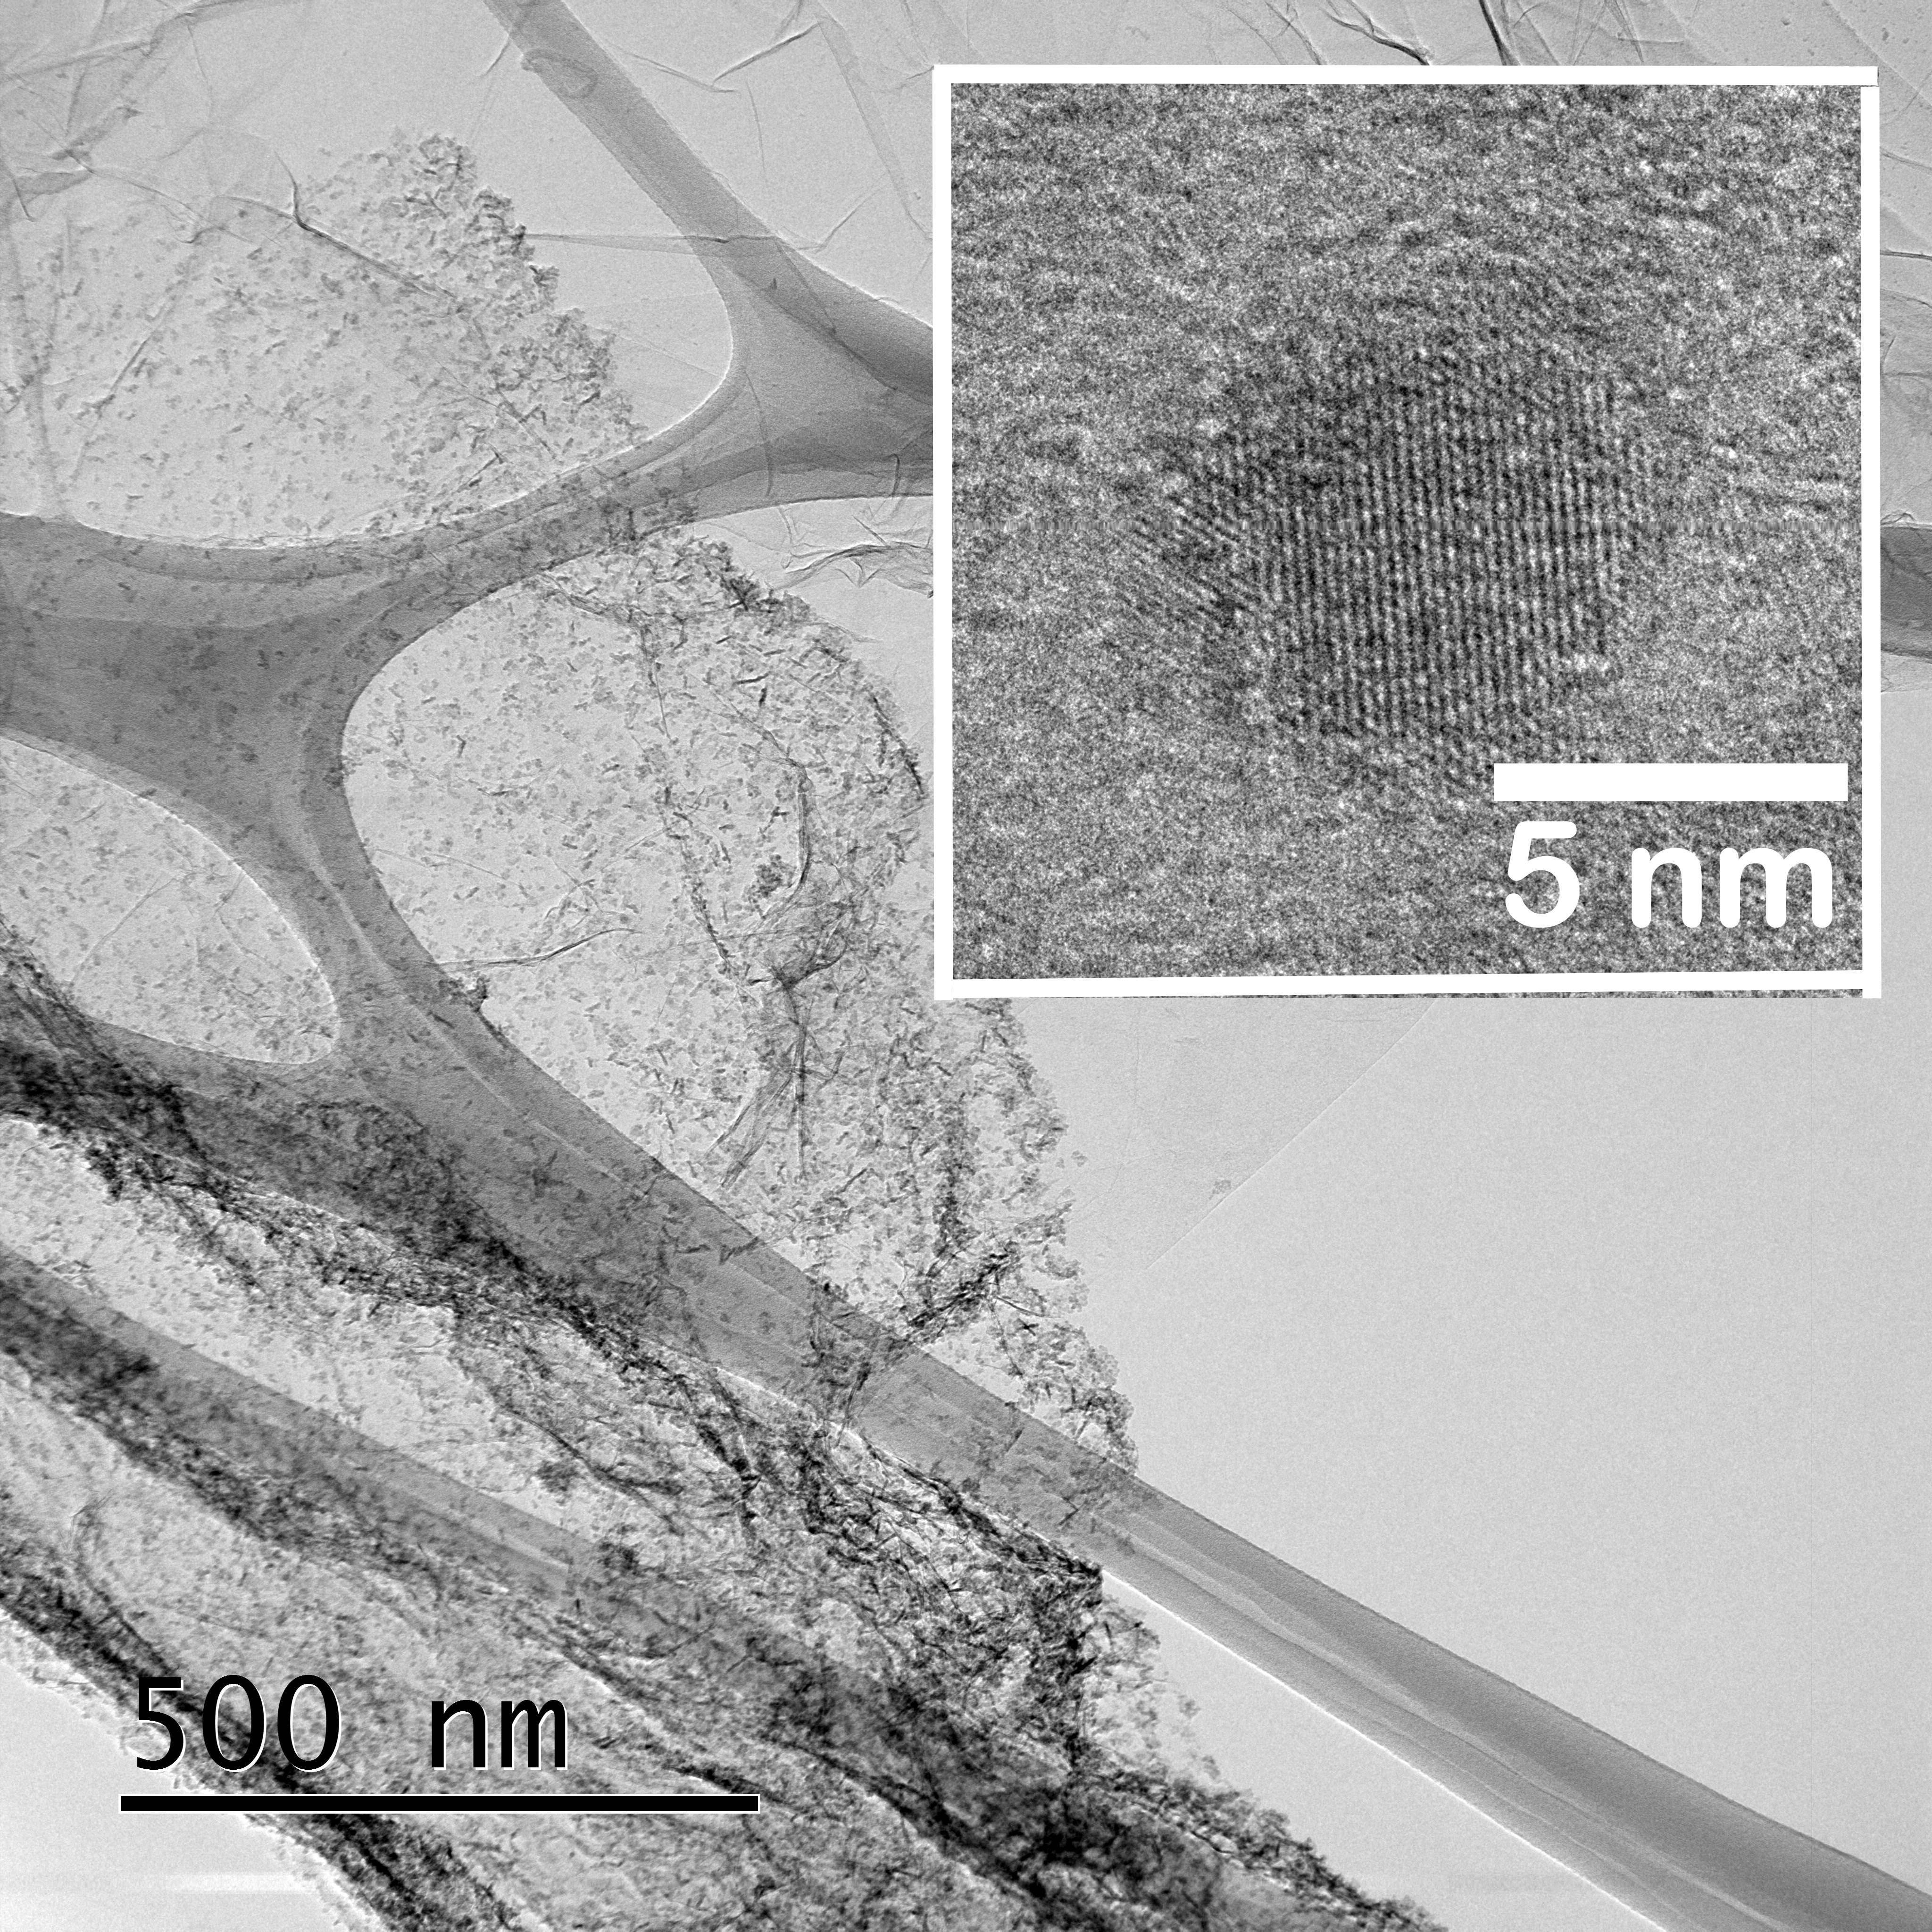 Graphene-metal hybrid material for additive manufacturing with nanoparticles